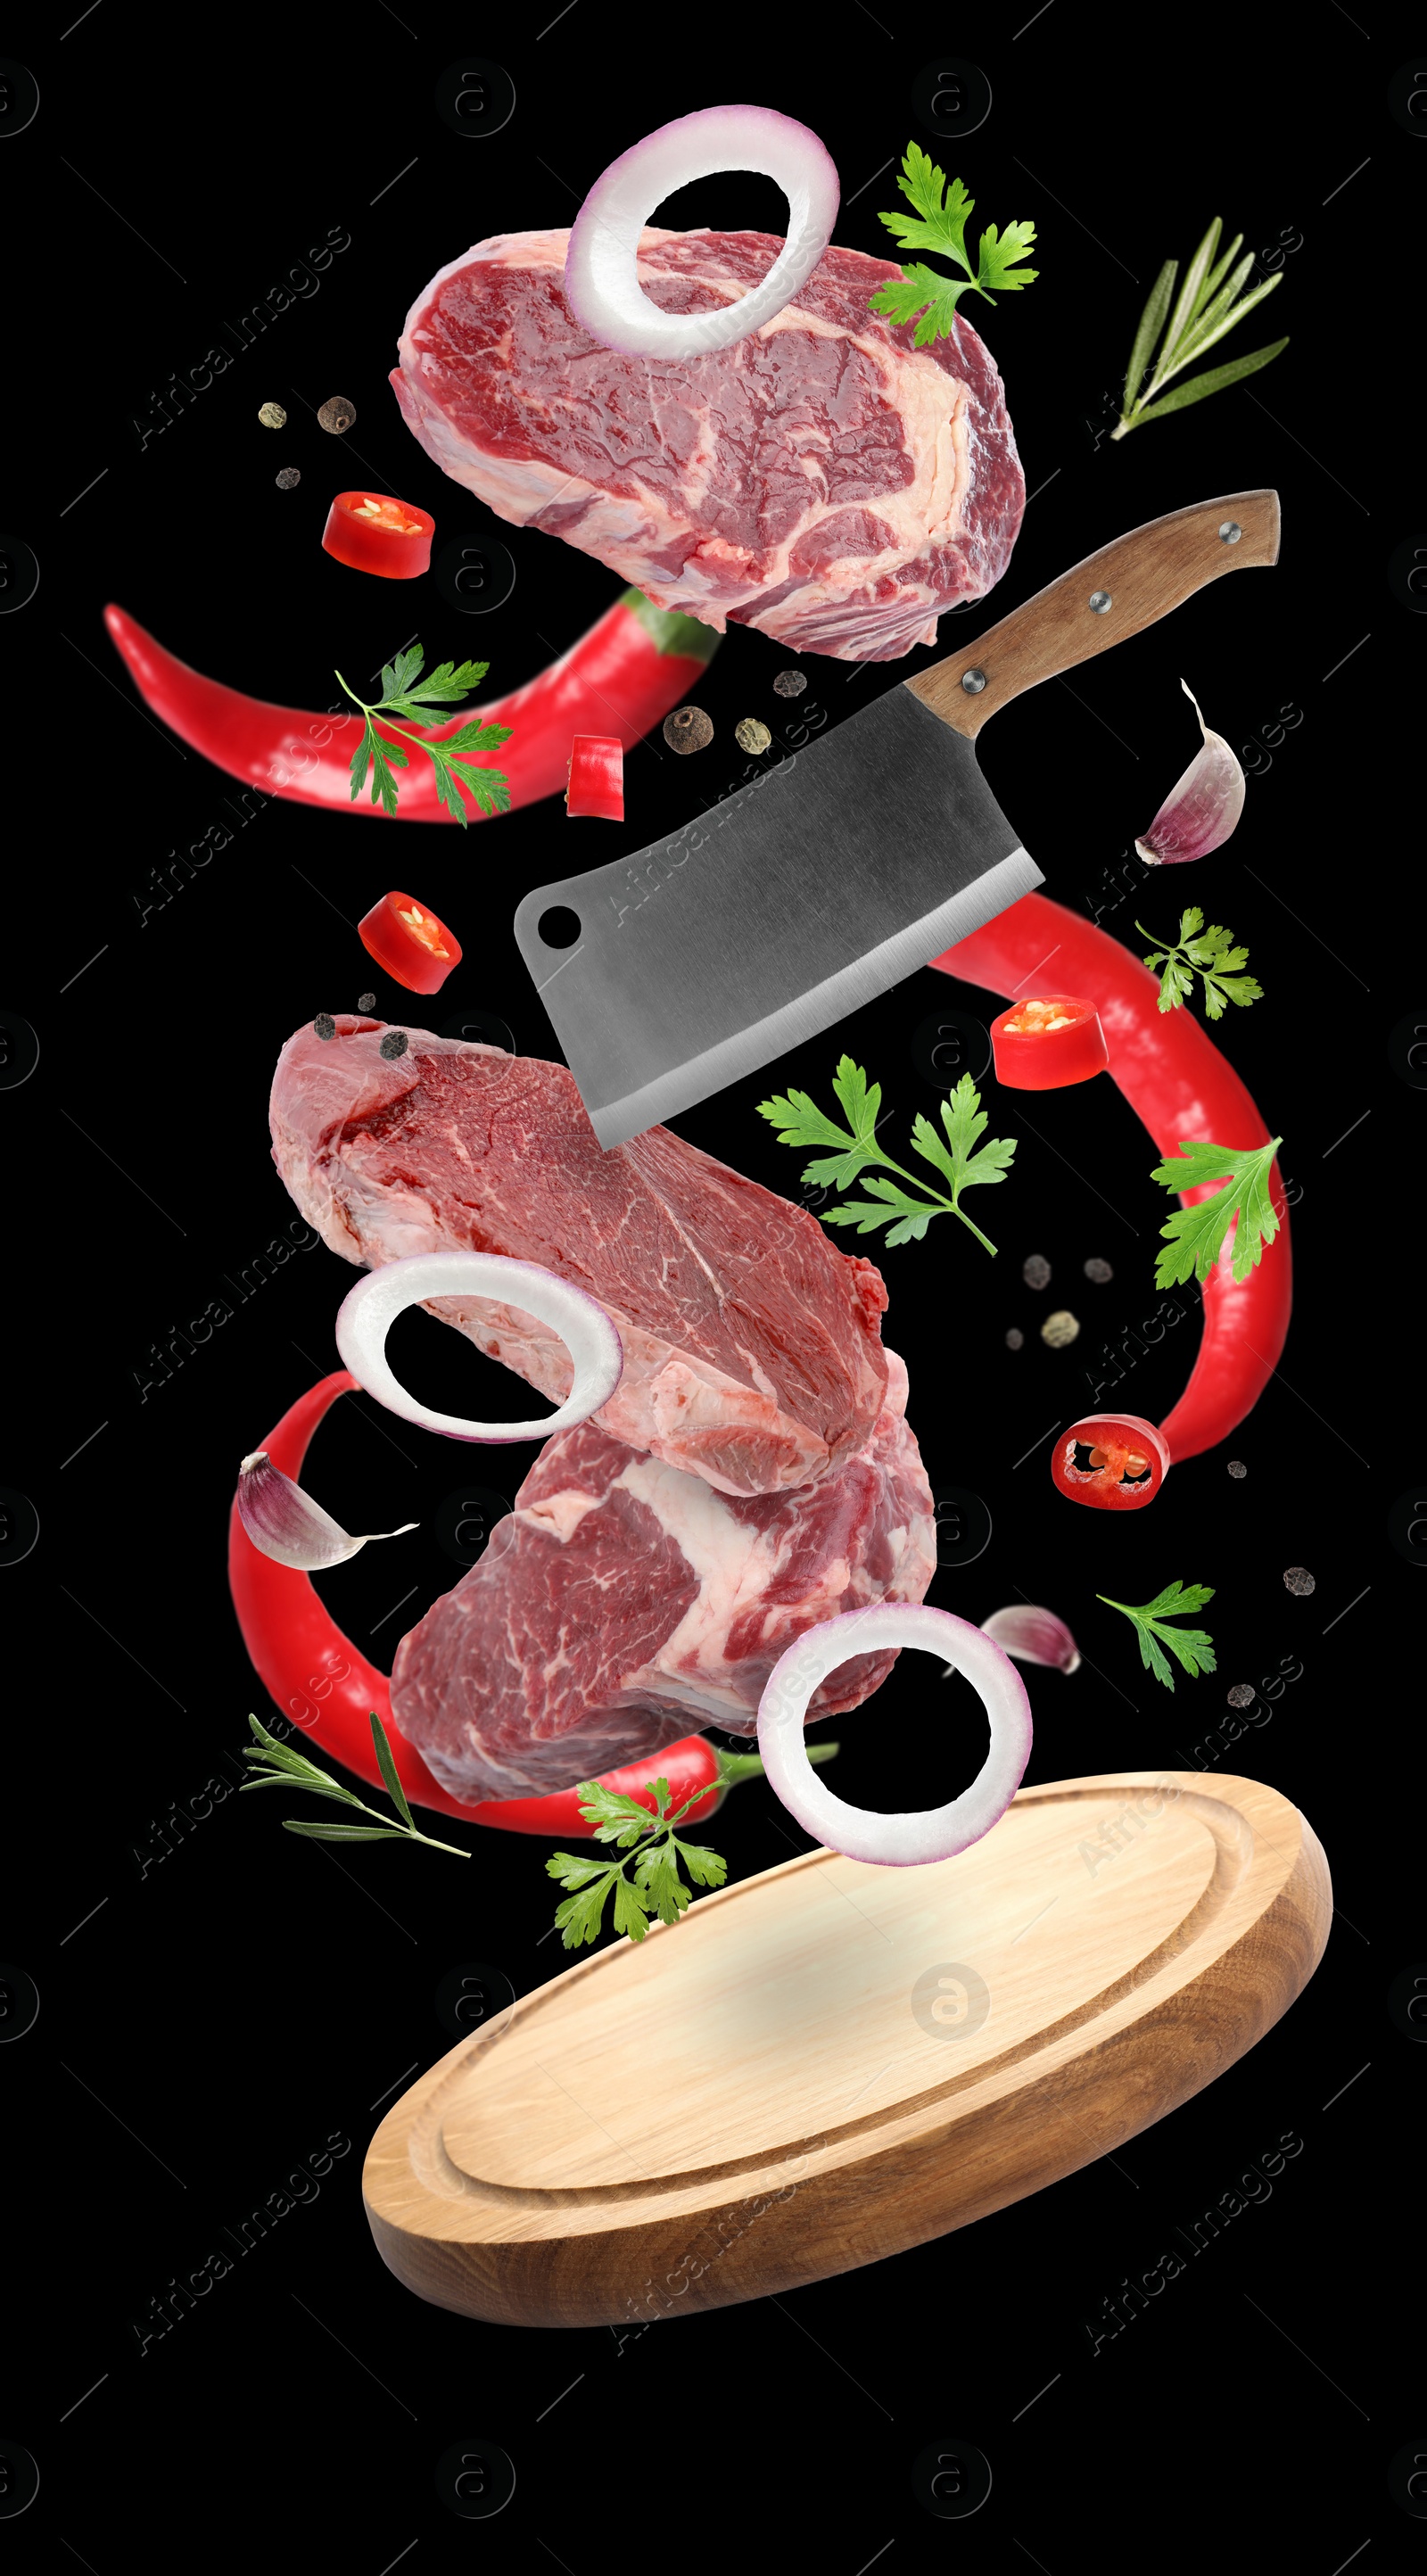 Image of Beef meat, different spices, cleaver knife and board falling on black background